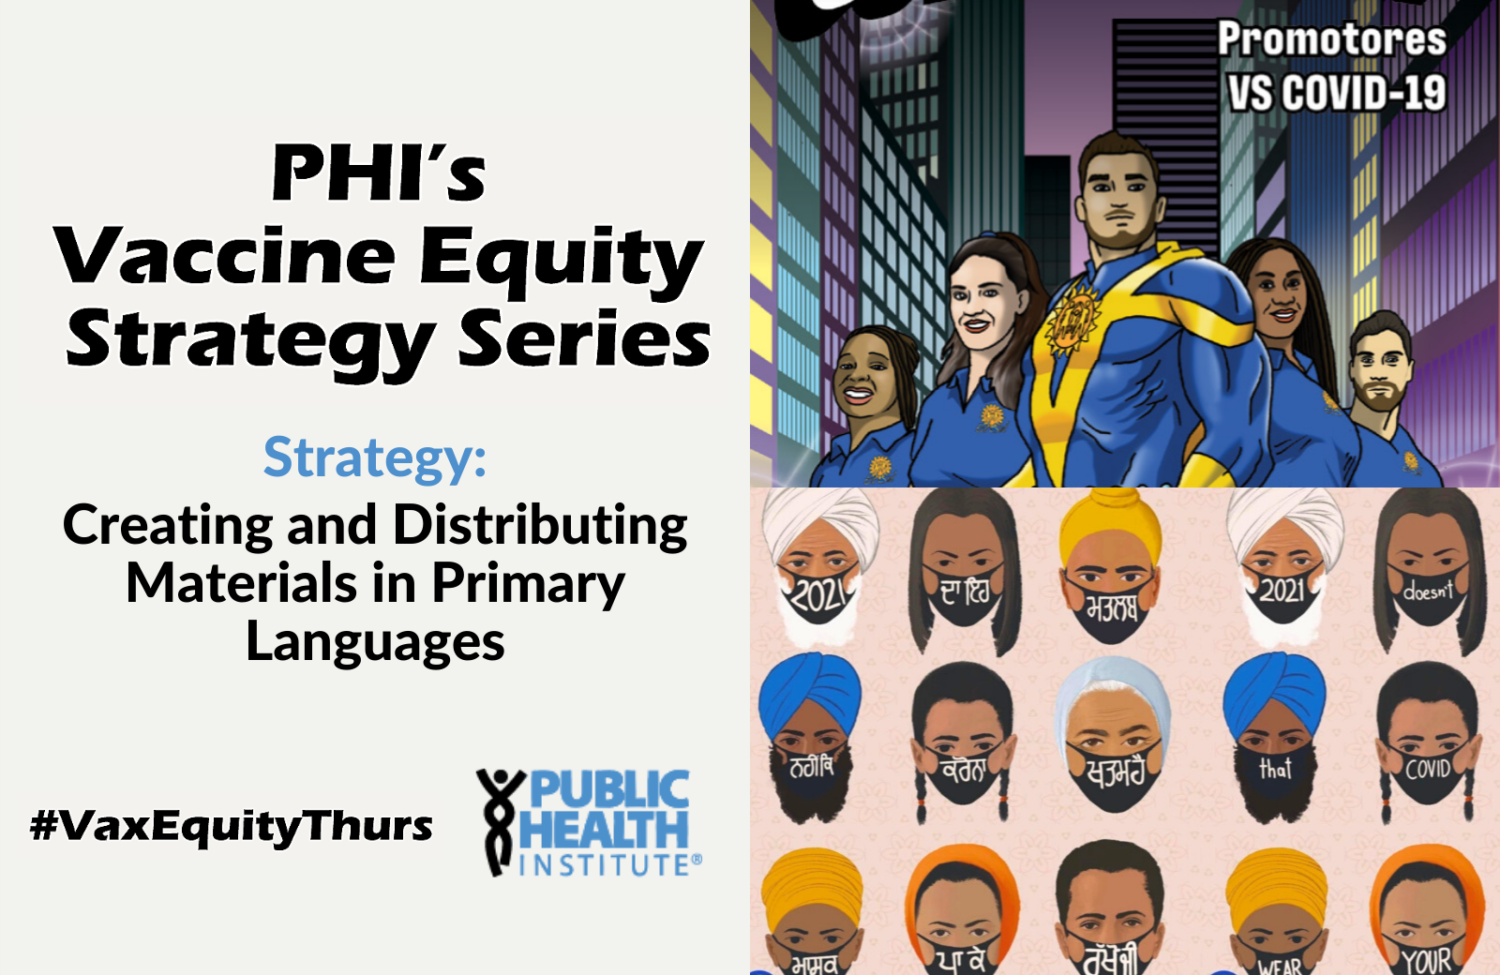 PHI's Vaccine Equity Strategy Series: Creating & distributing materials in primary languages